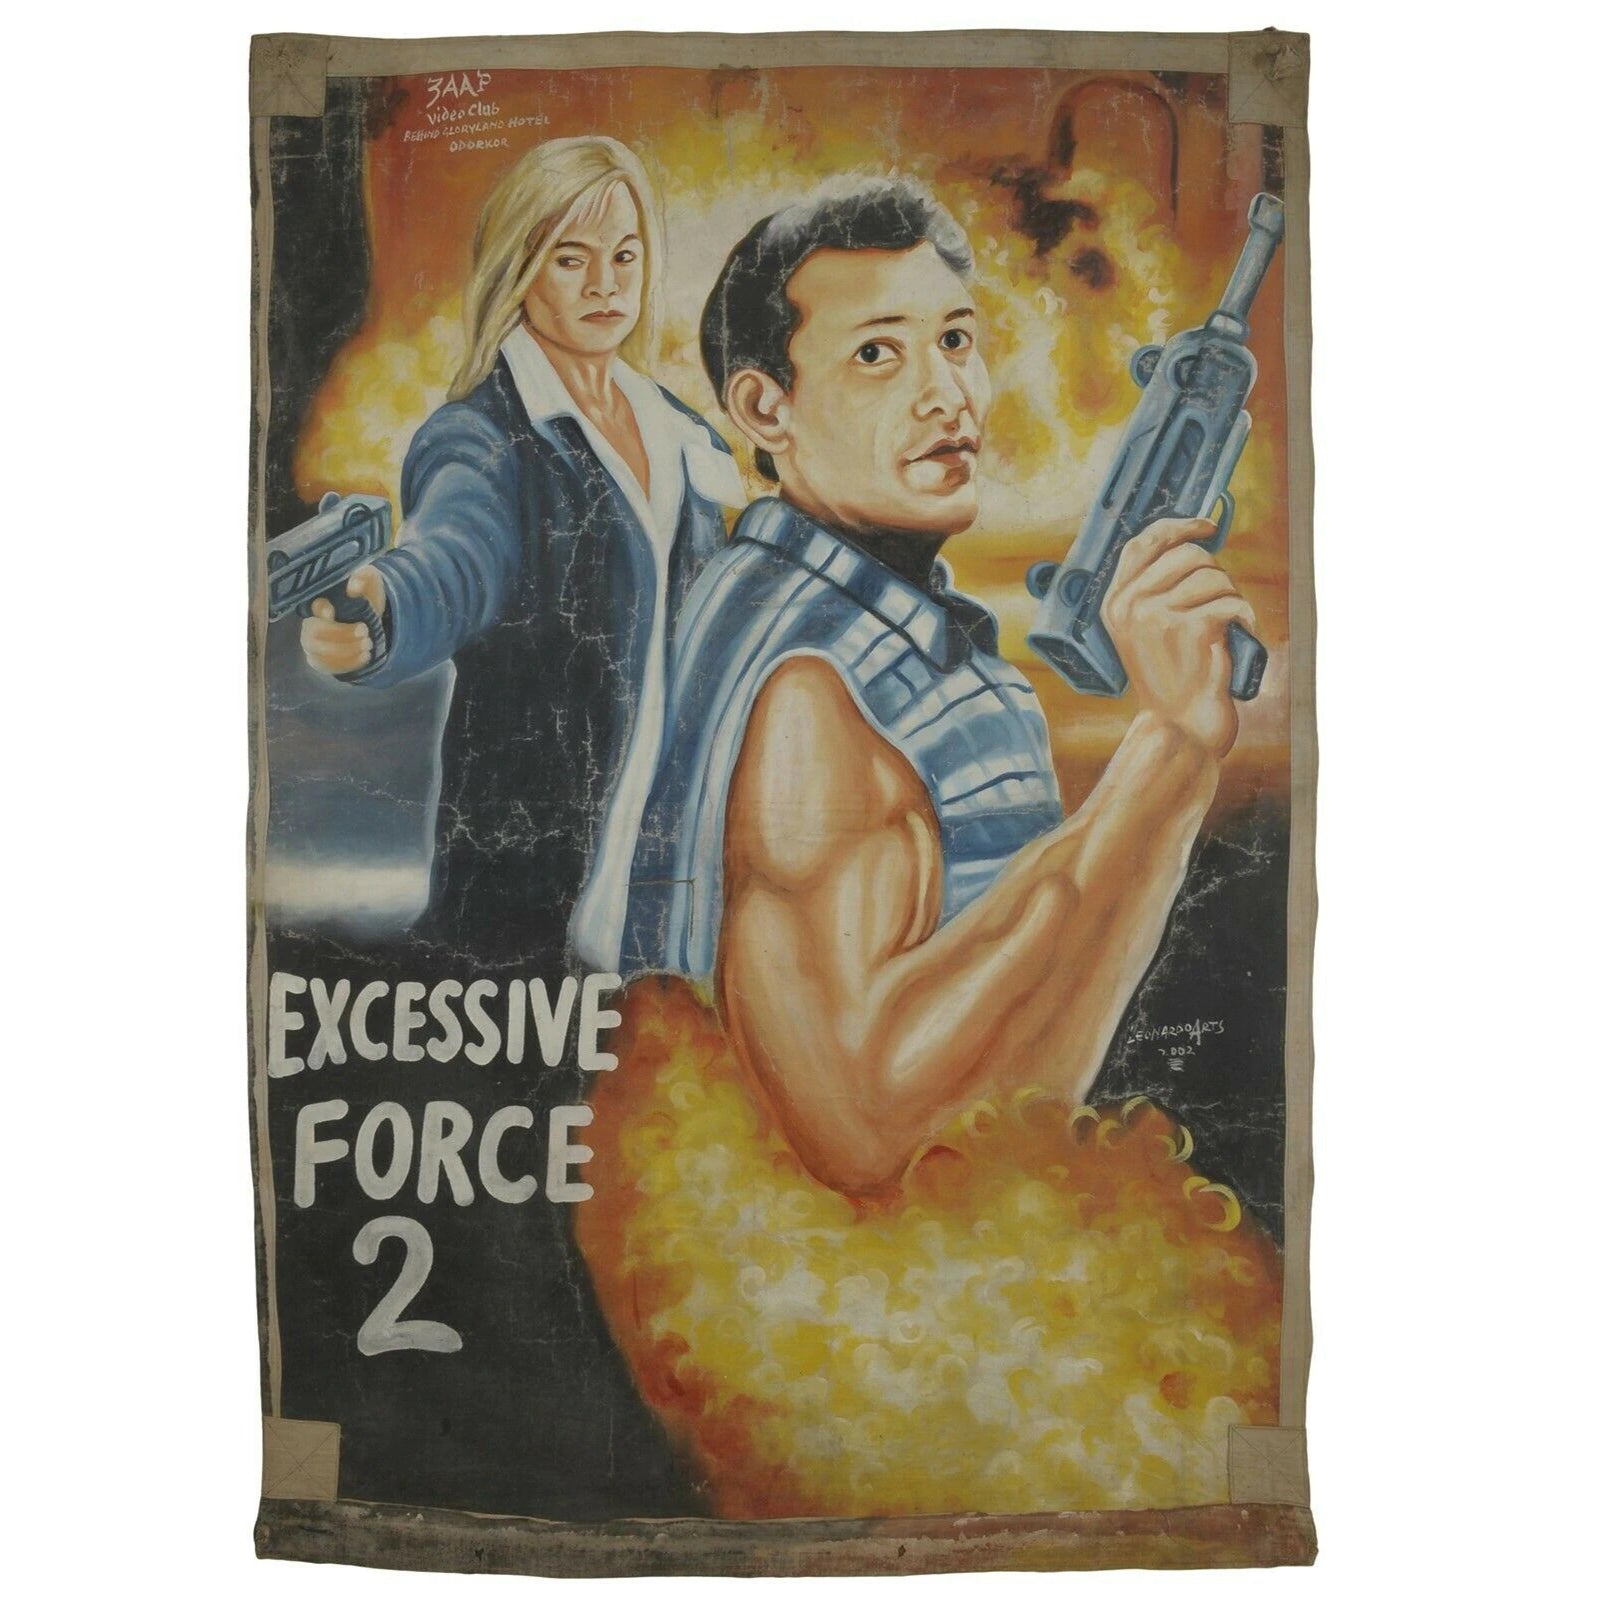 Ghana Movie poster African cinema Art hand painted flour sack EXCESSIVE FORCE 2 - Tribalgh